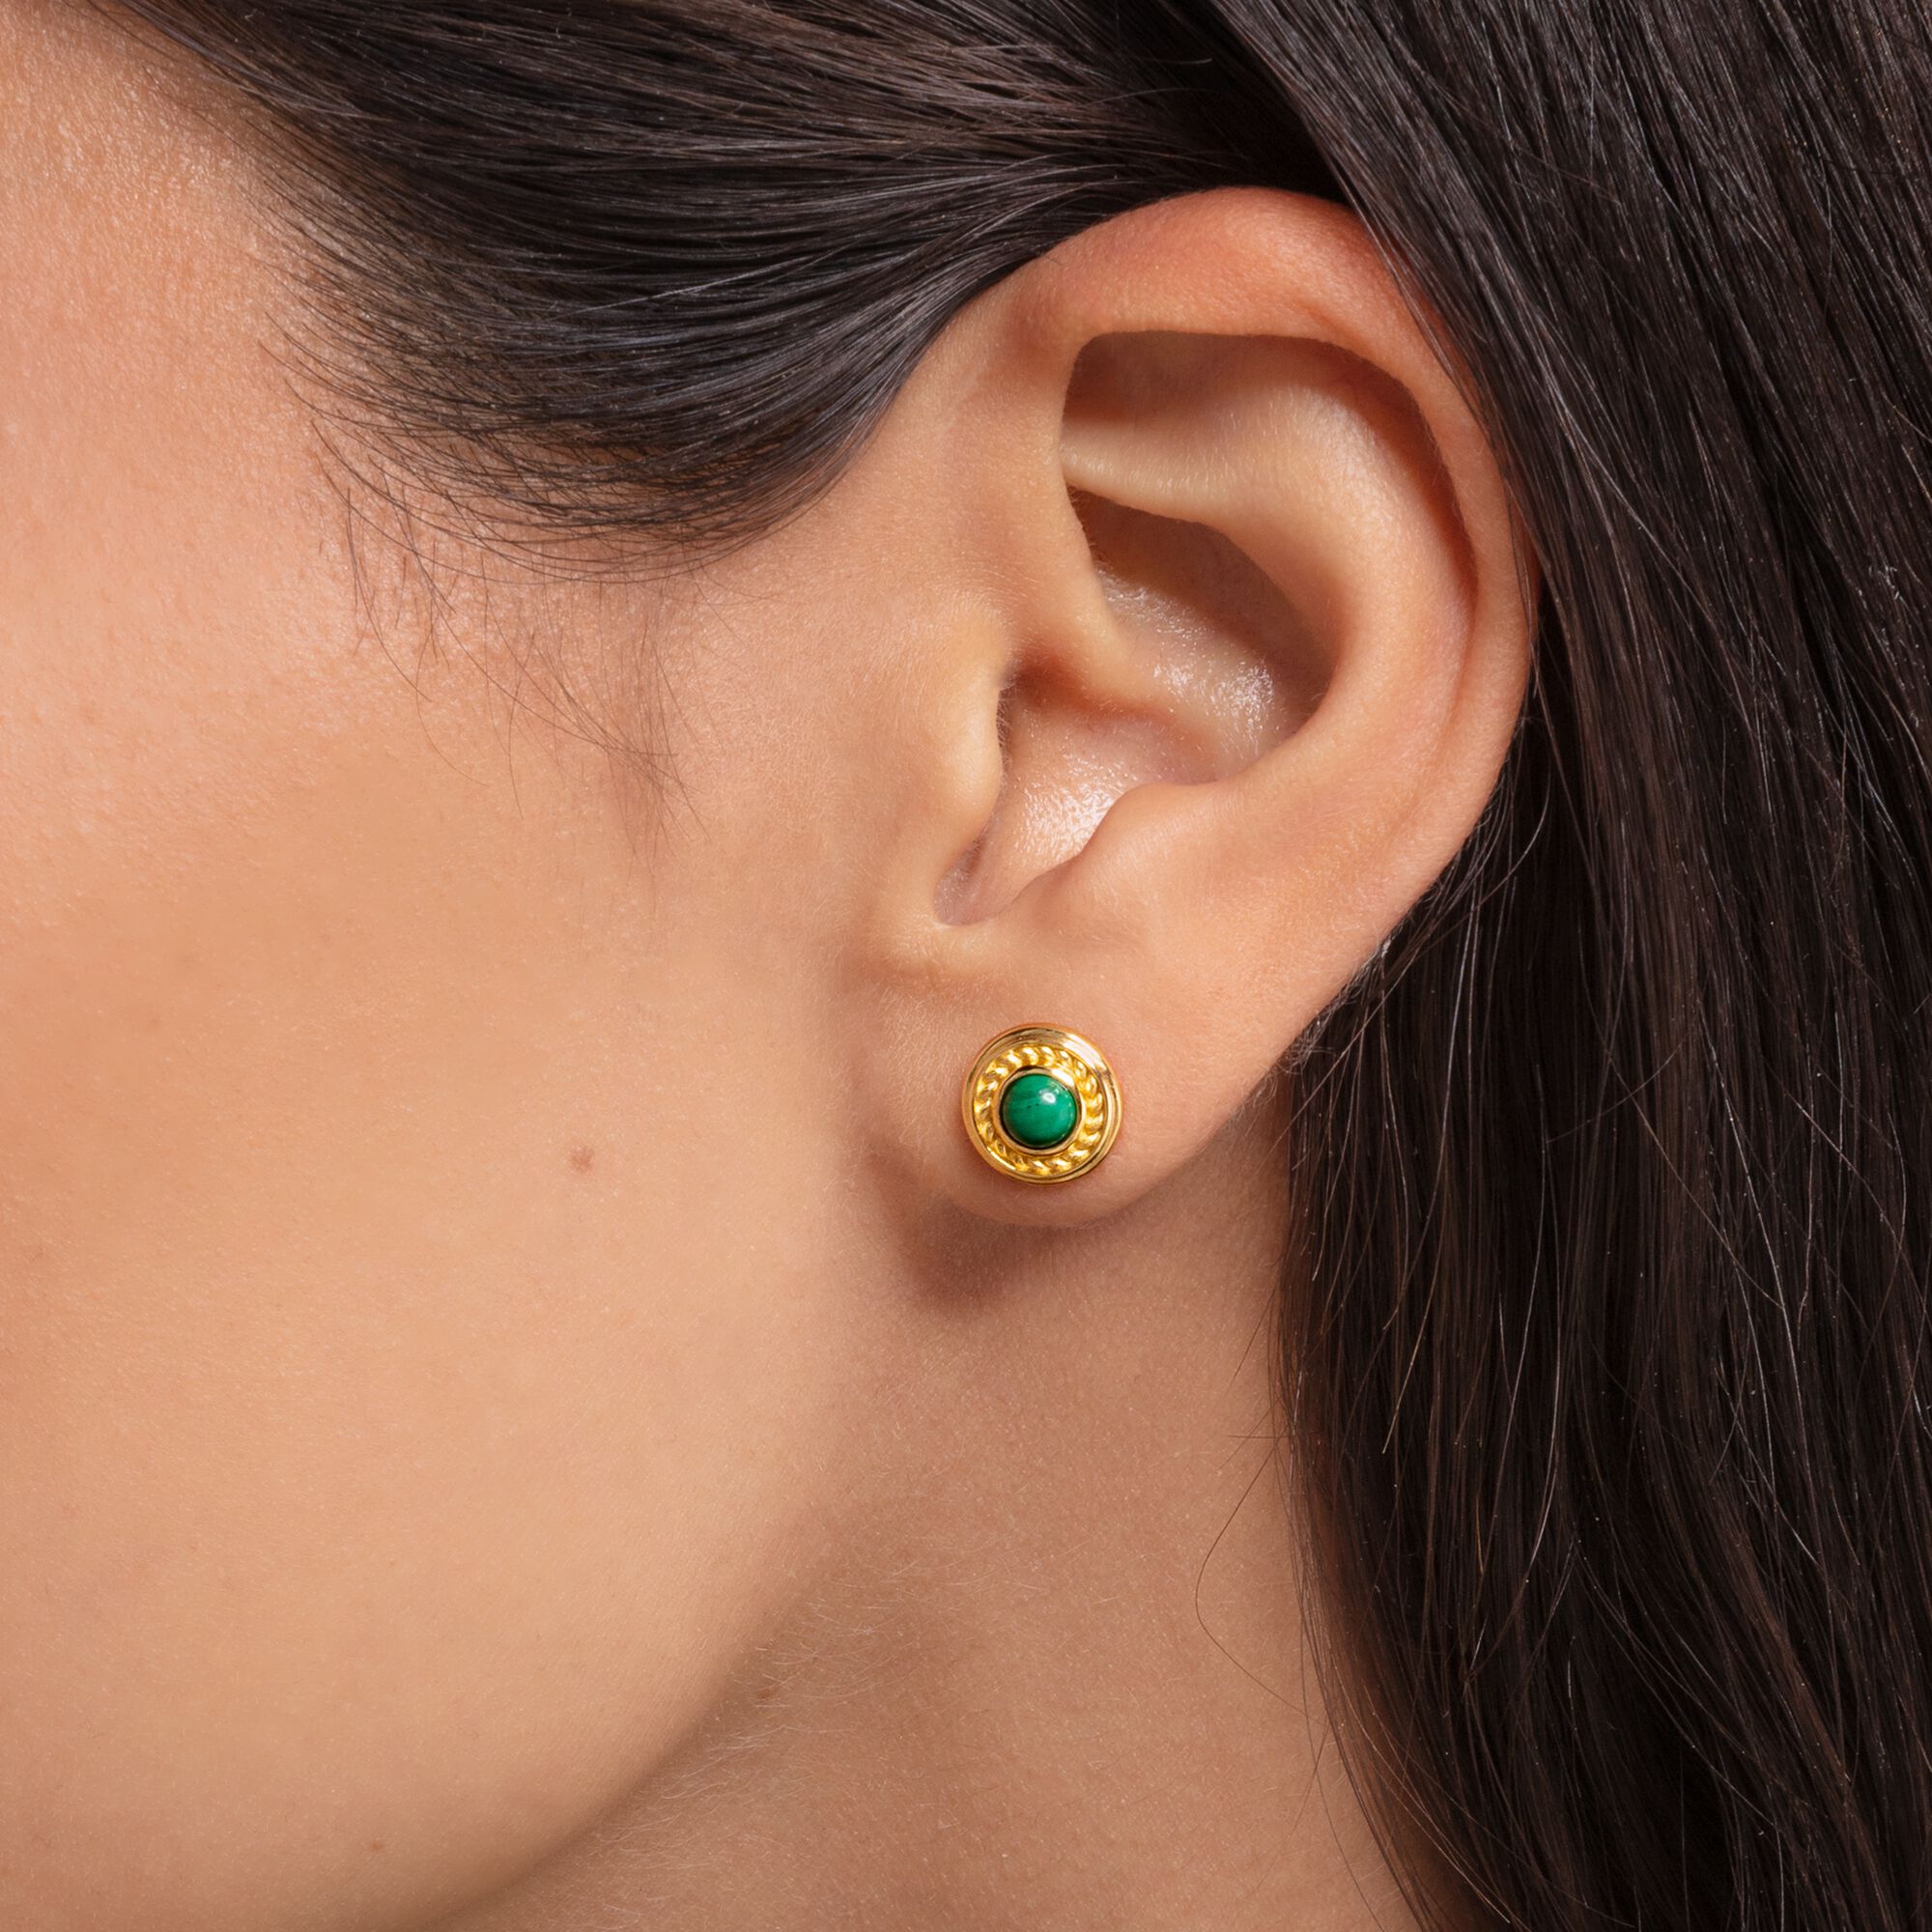 Ear studs for women: Vintage-look with green malachite | THOMAS SABO